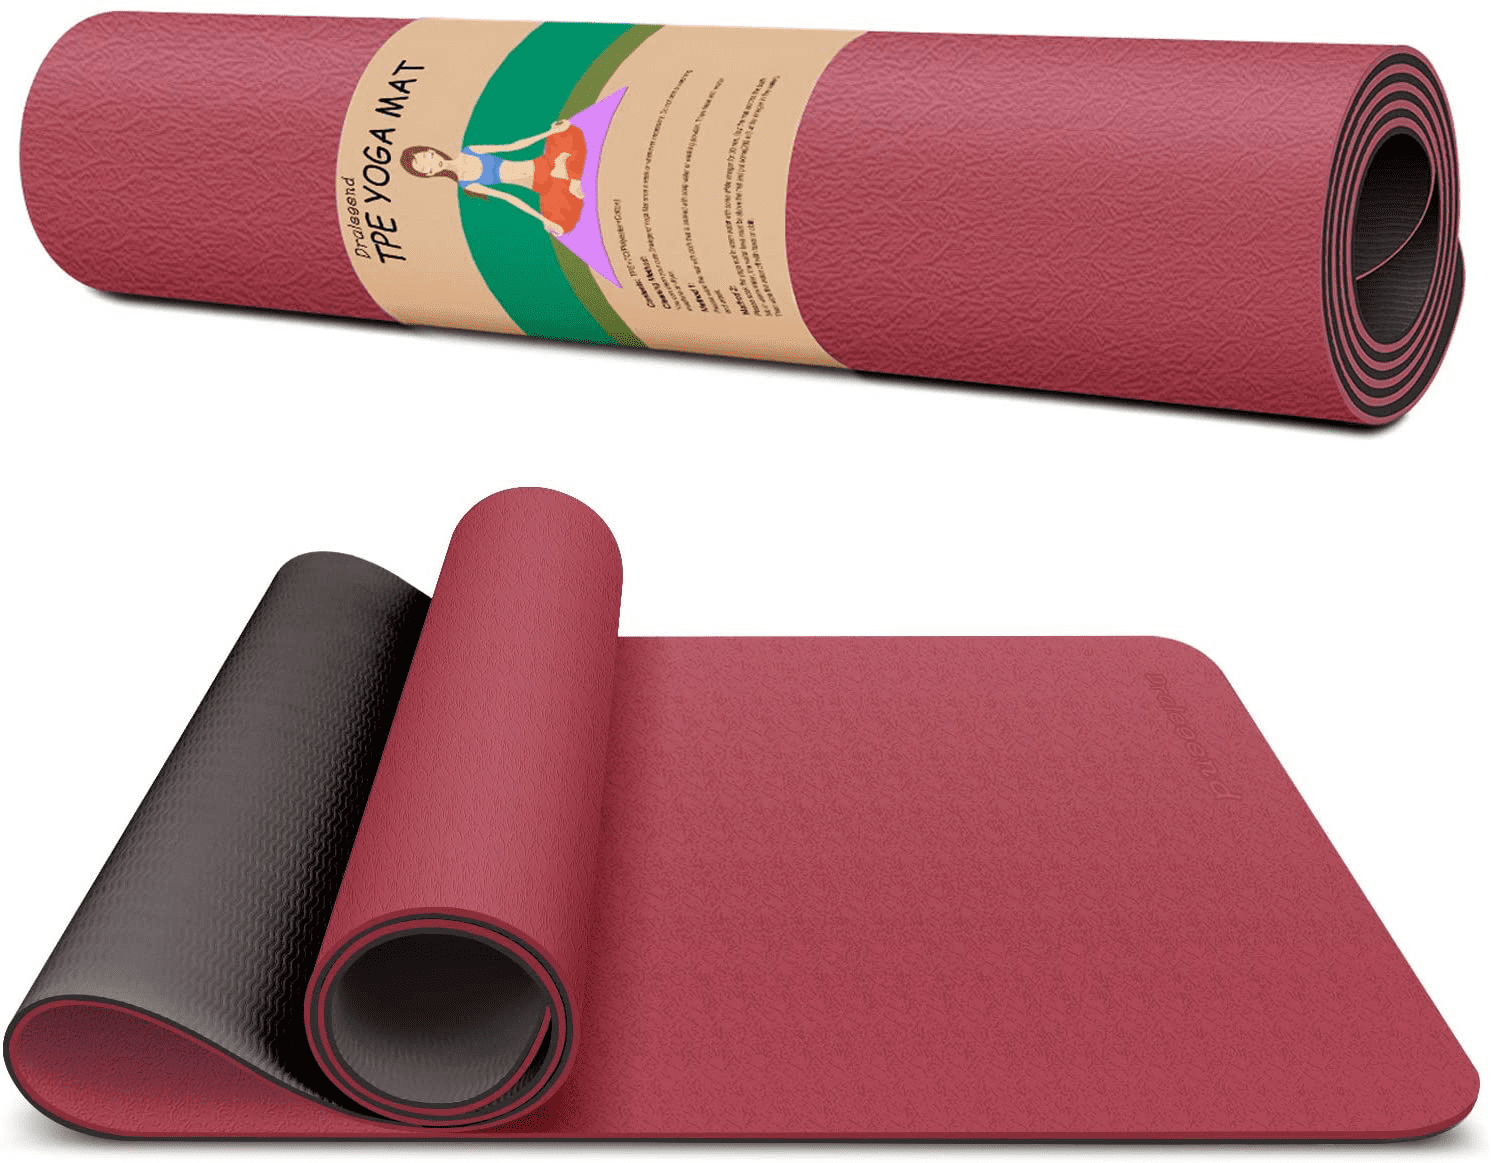  Sweet Sweat Yoga Mat (Dual Sided) - Fitness & Exercise Mat  with Easy-Cinch Yoga Mat Carrier Strap (72L x 24W) : Sports & Outdoors